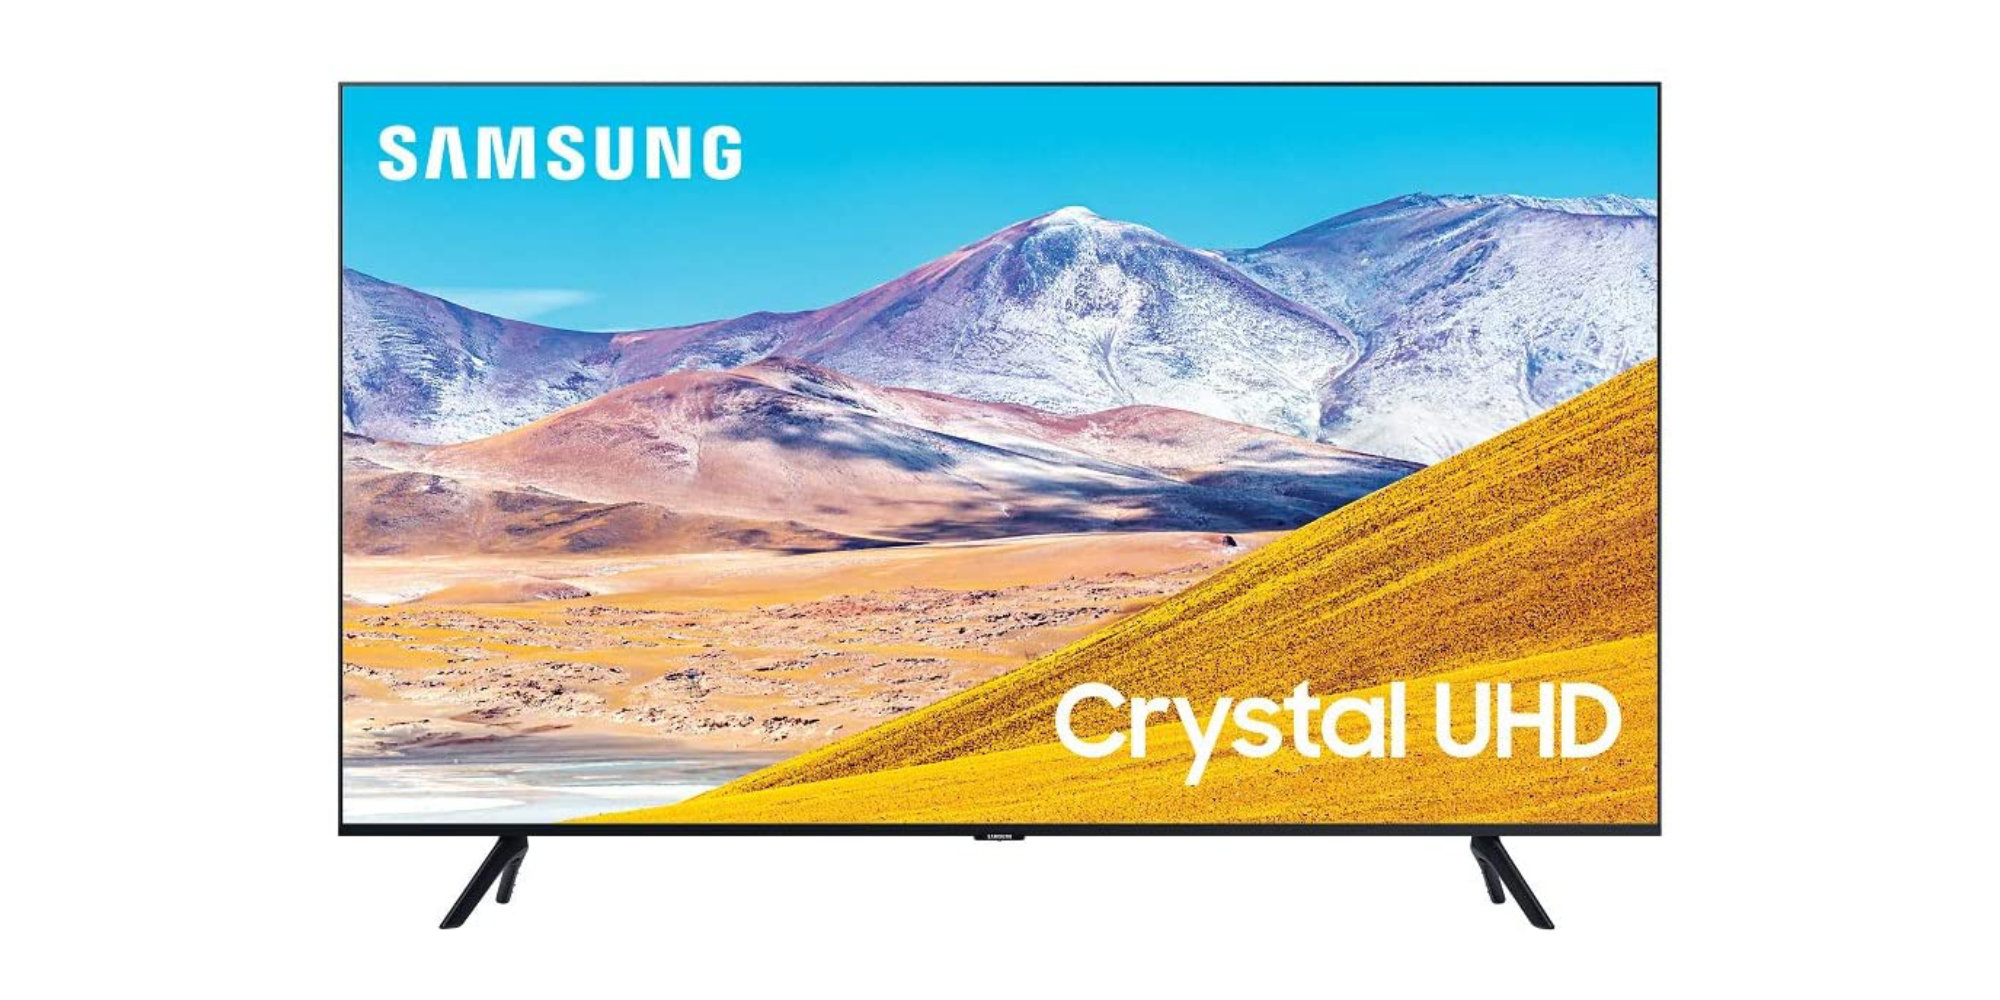 Samsung’s new 75-inch Crystal 4K Smart TV gets largest discount yet, now $998 - 9to5Toys